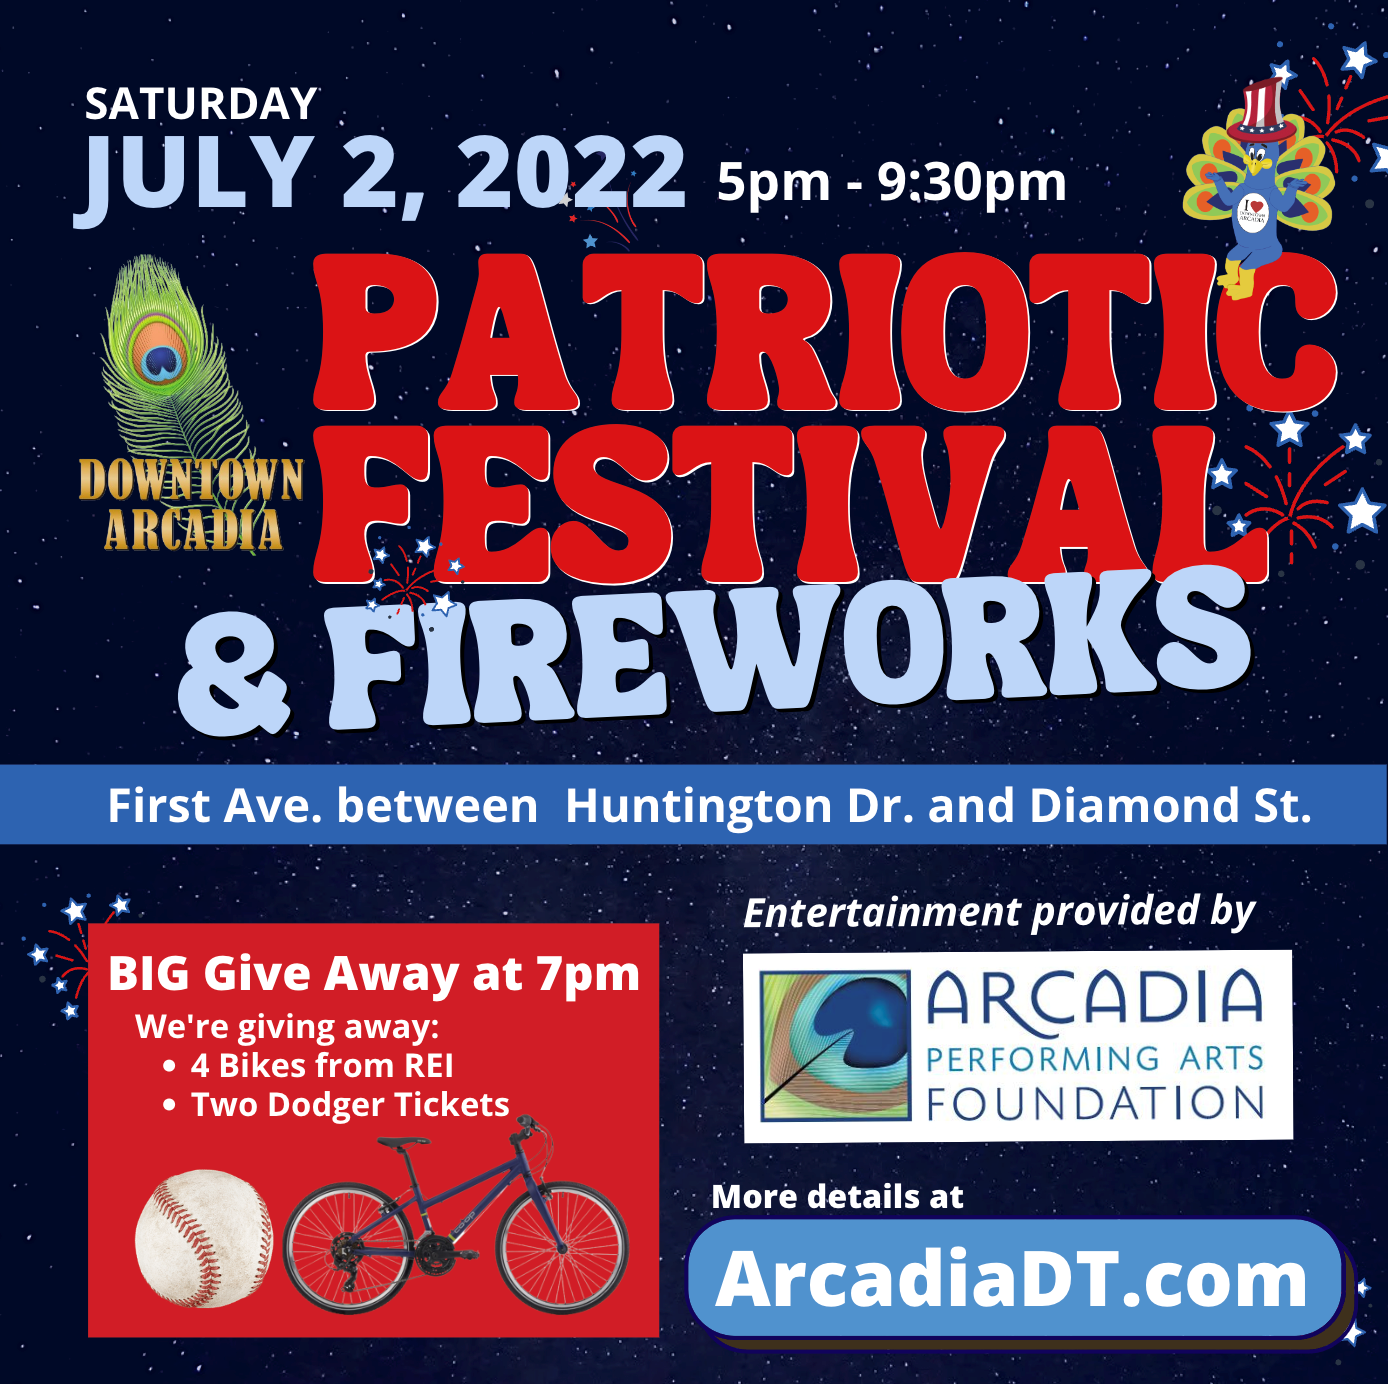 flyer for Downtown Arcadia's Patriotic Festival with Fireworks 